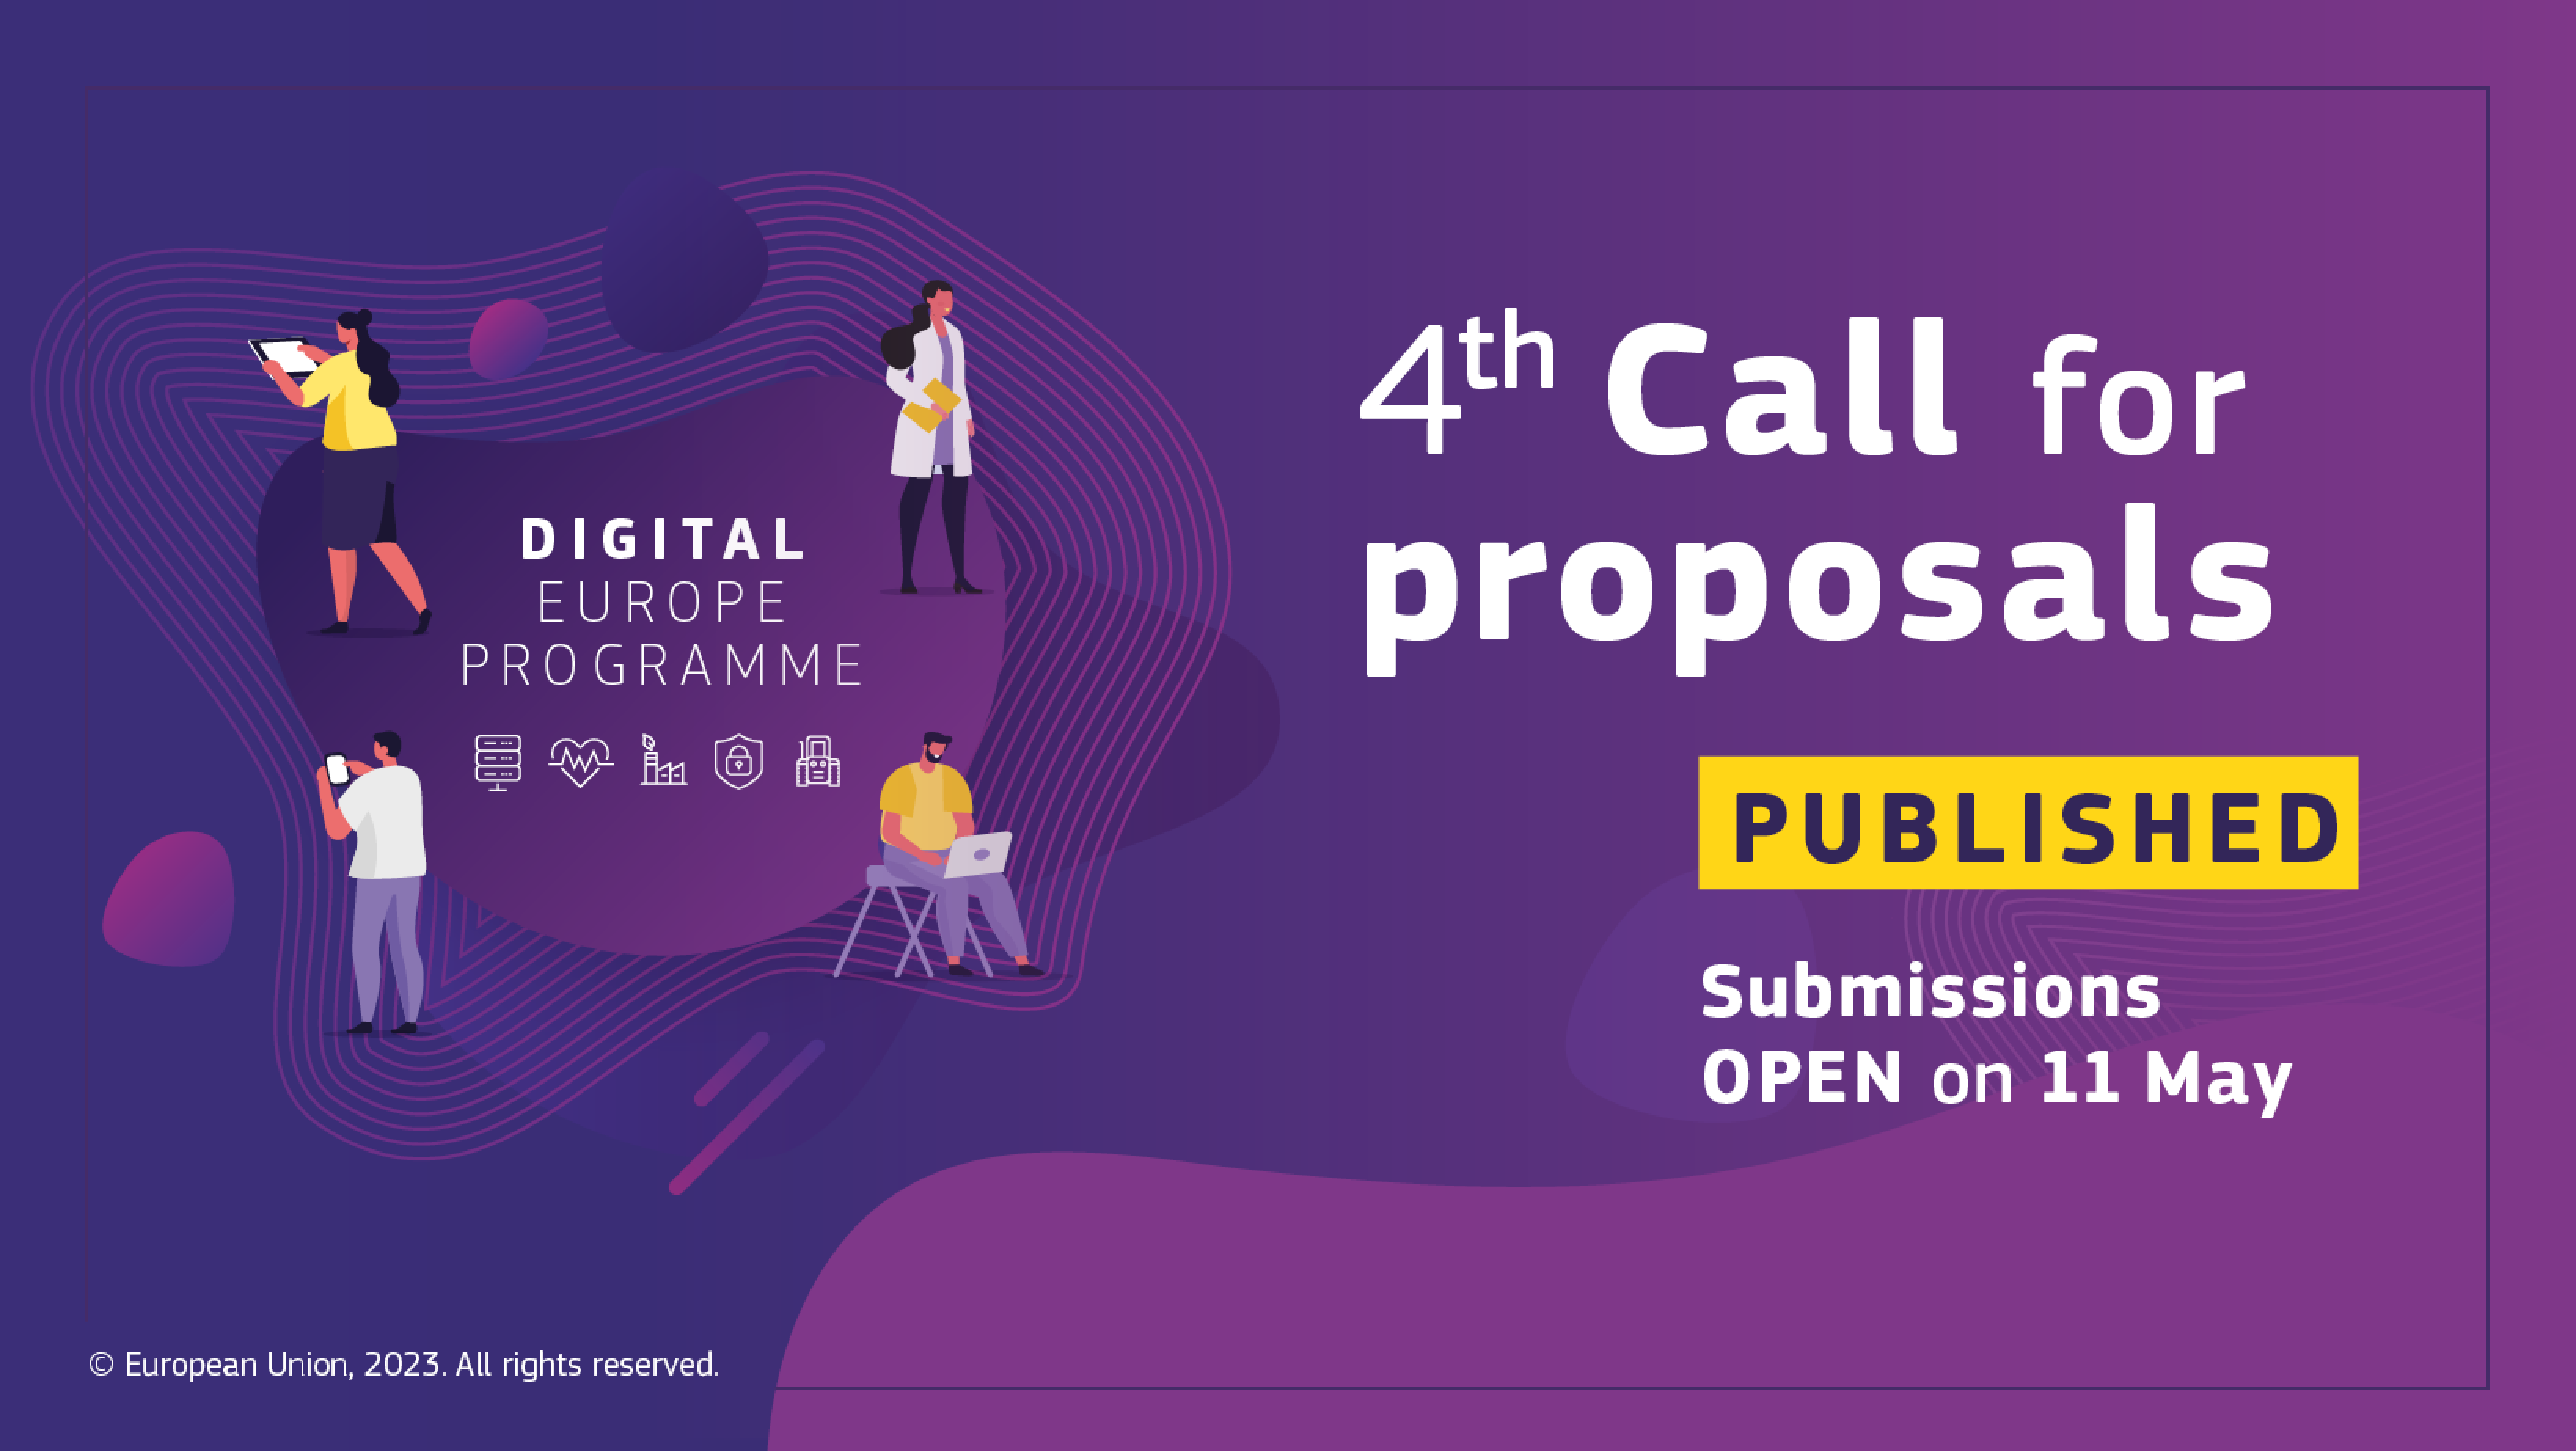 4th Call for proposals under the Digital Europe Programme now published